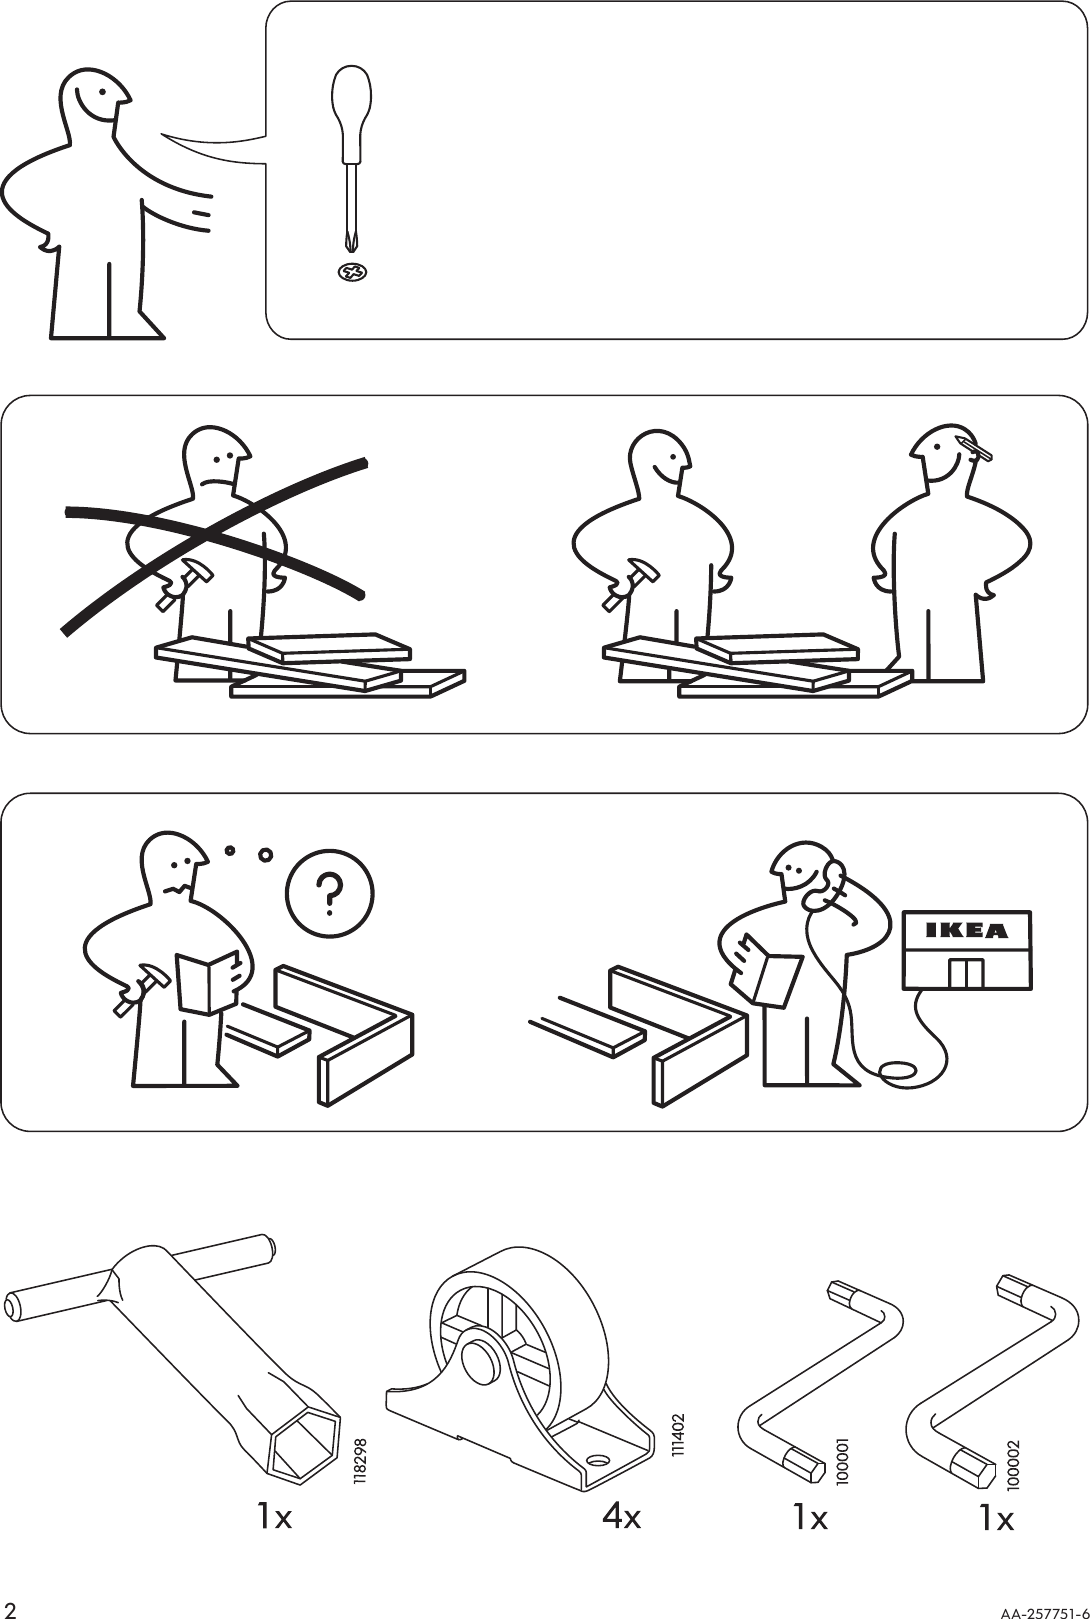 Page 2 of 12 - Ikea Ikea-Hagalund-Sofa-Bed-Frame-Assembly-Instruction